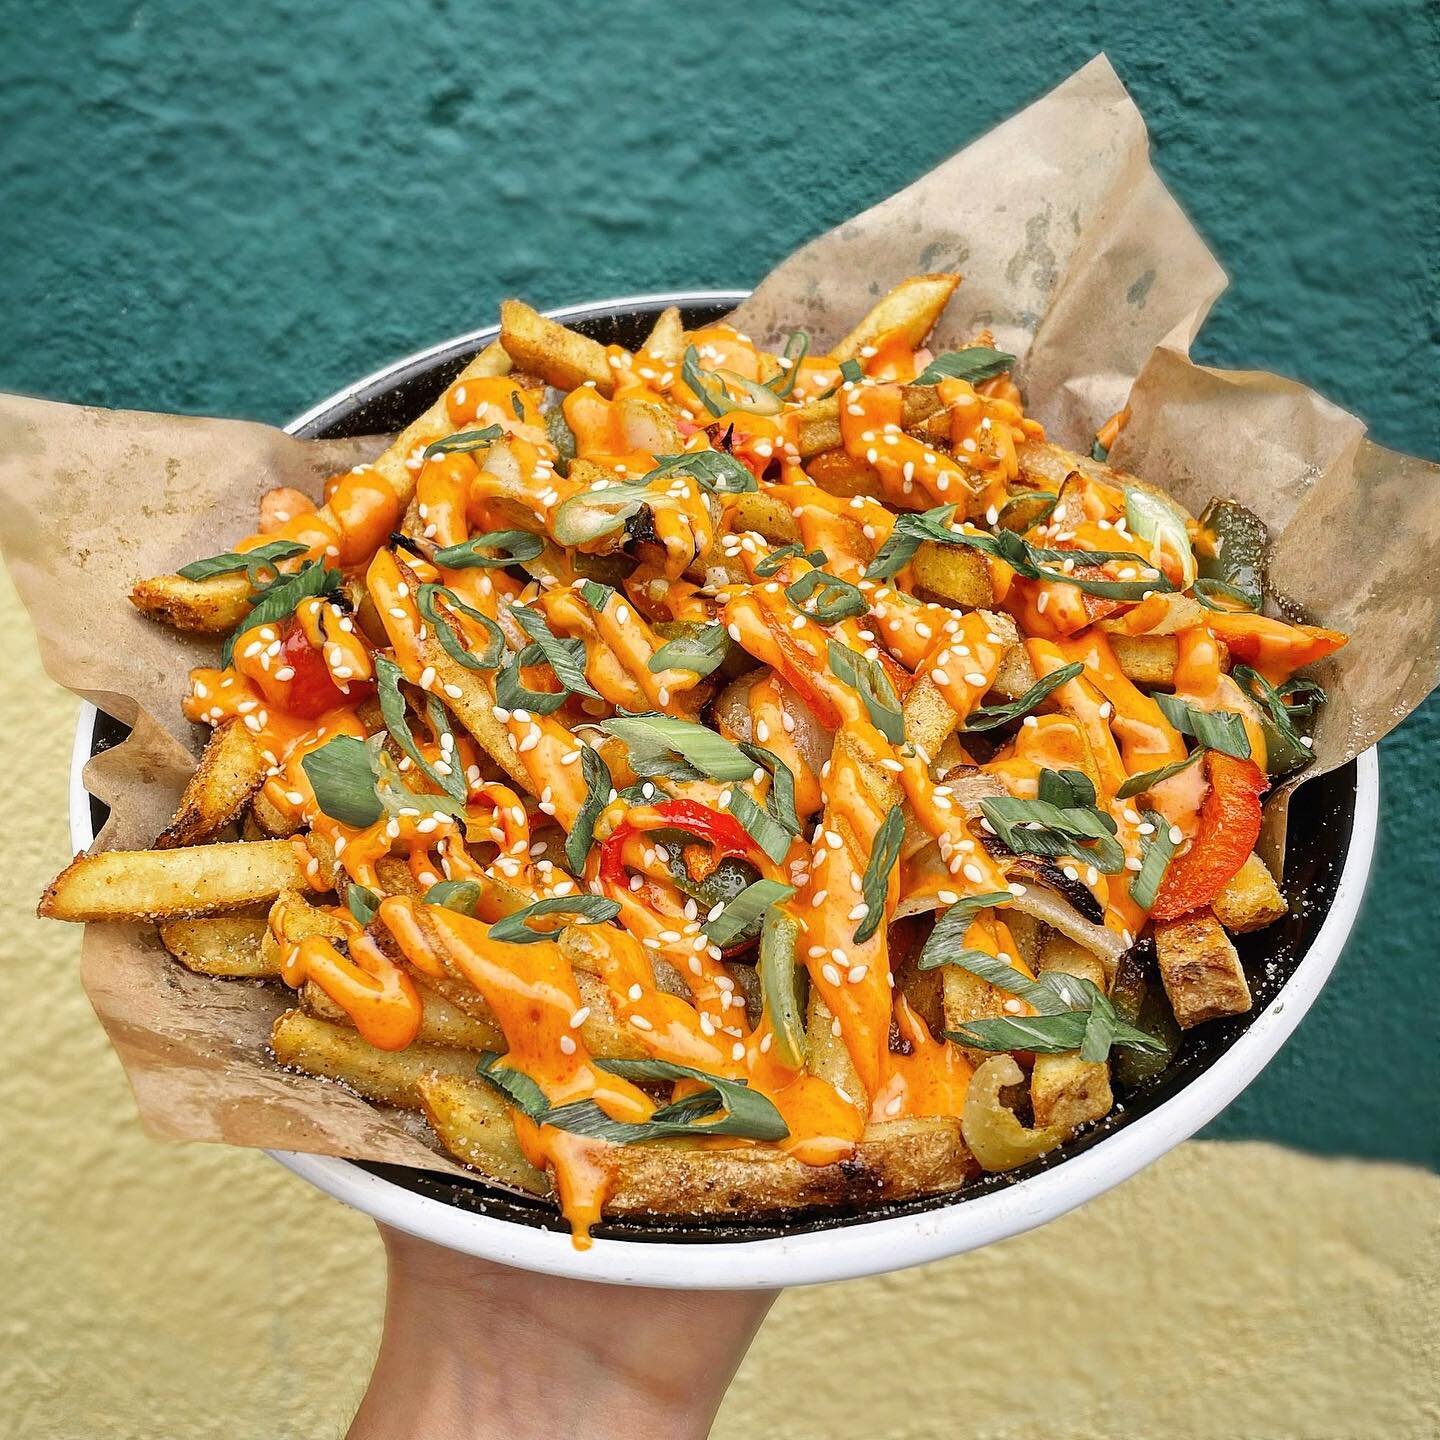 This weeks special 😋

Salt and pepper fries mixed with our salt and pepper mix, chopped veg, sriracha mayo, garlic oil, spring onions and sesame seeds! 

Can confirm, delicious!